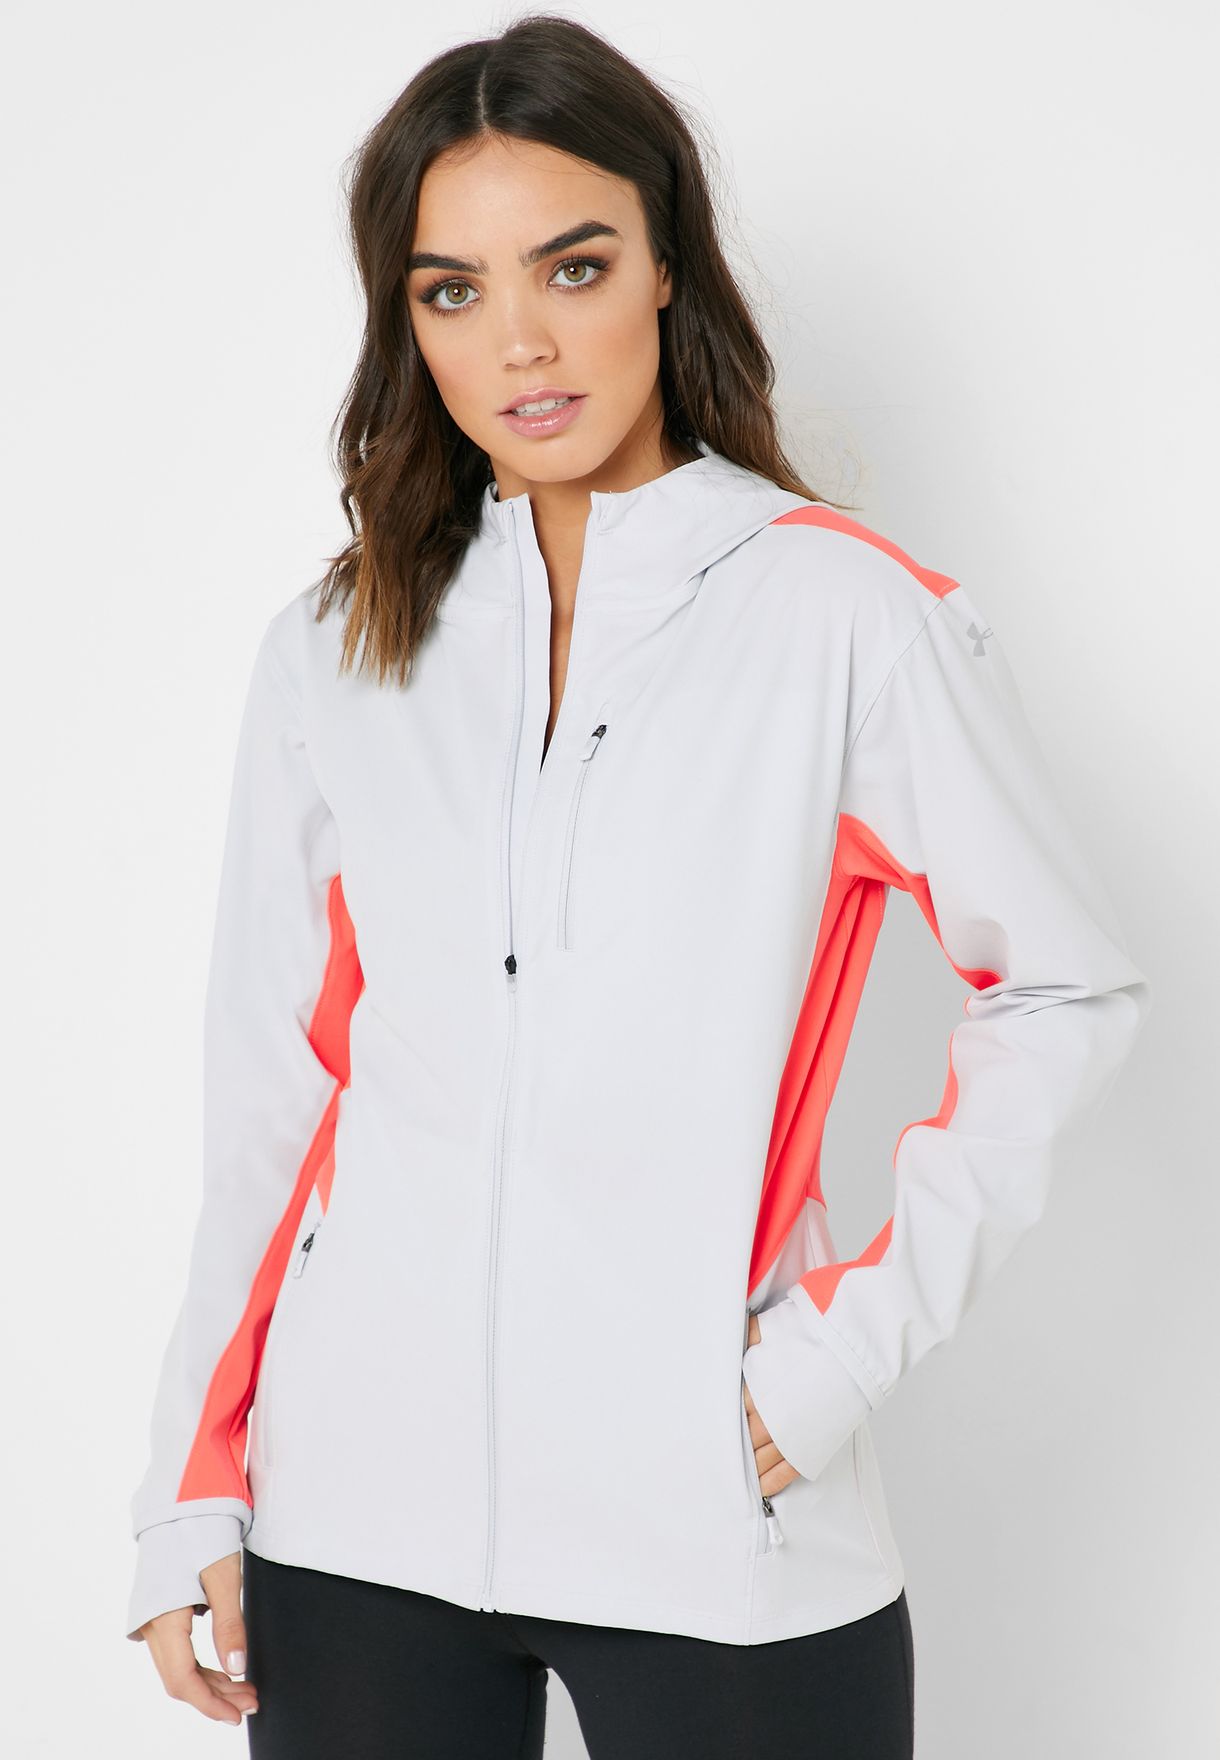 outrun the storm jacket